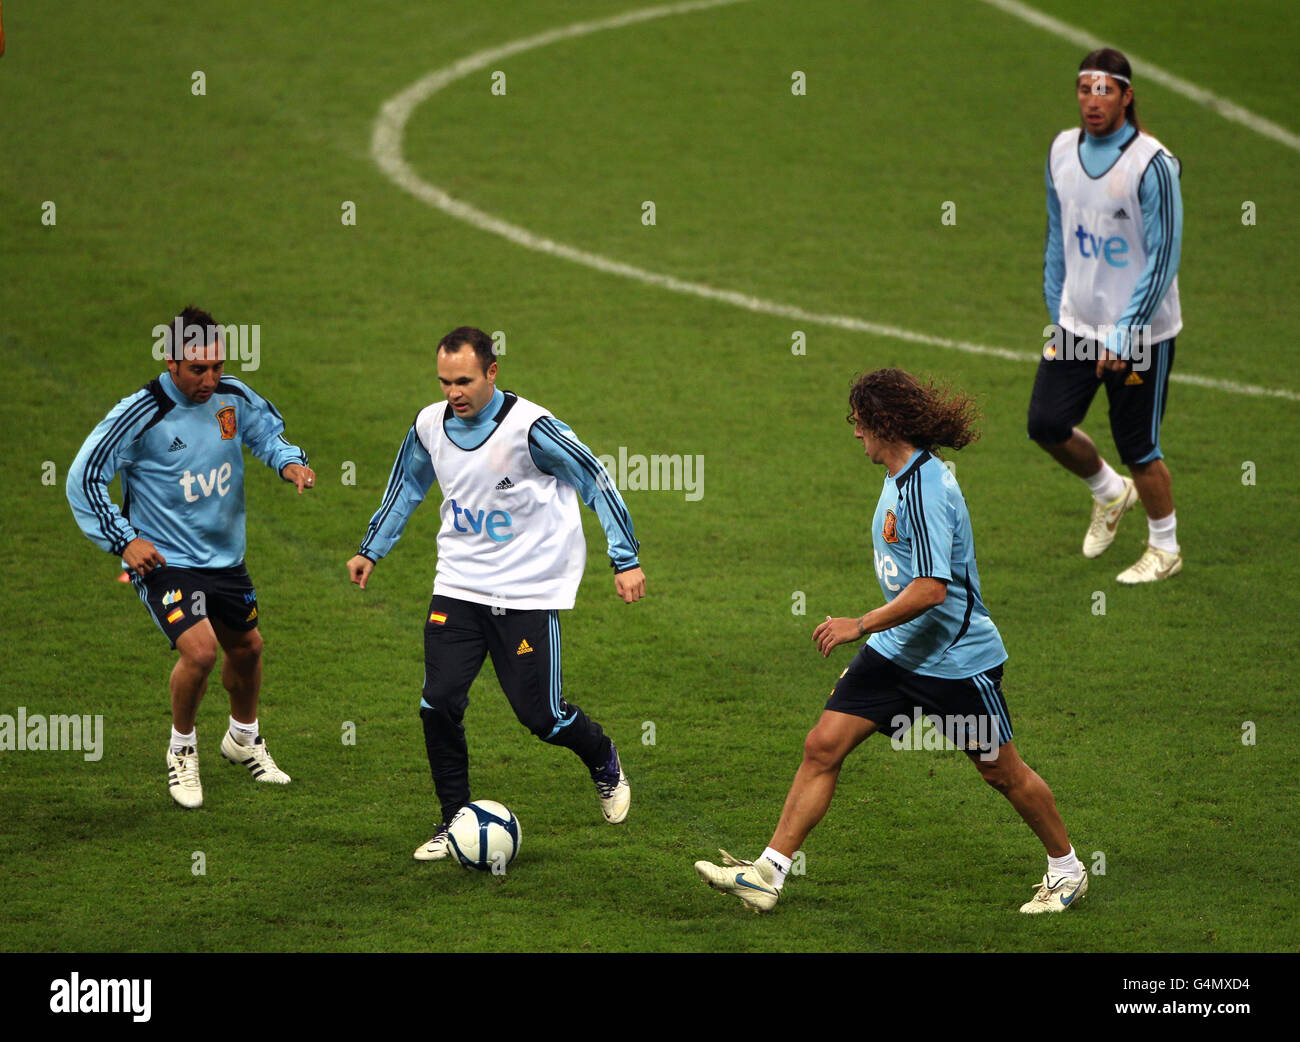 Soccer - International Friendly - England v Spain - Spain Training Session - Wembley Stadium. Spain's Andres Iniesta (second left) and Carles Puyol (second right) during the training session at Wembley Stadium, London. Stock Photo